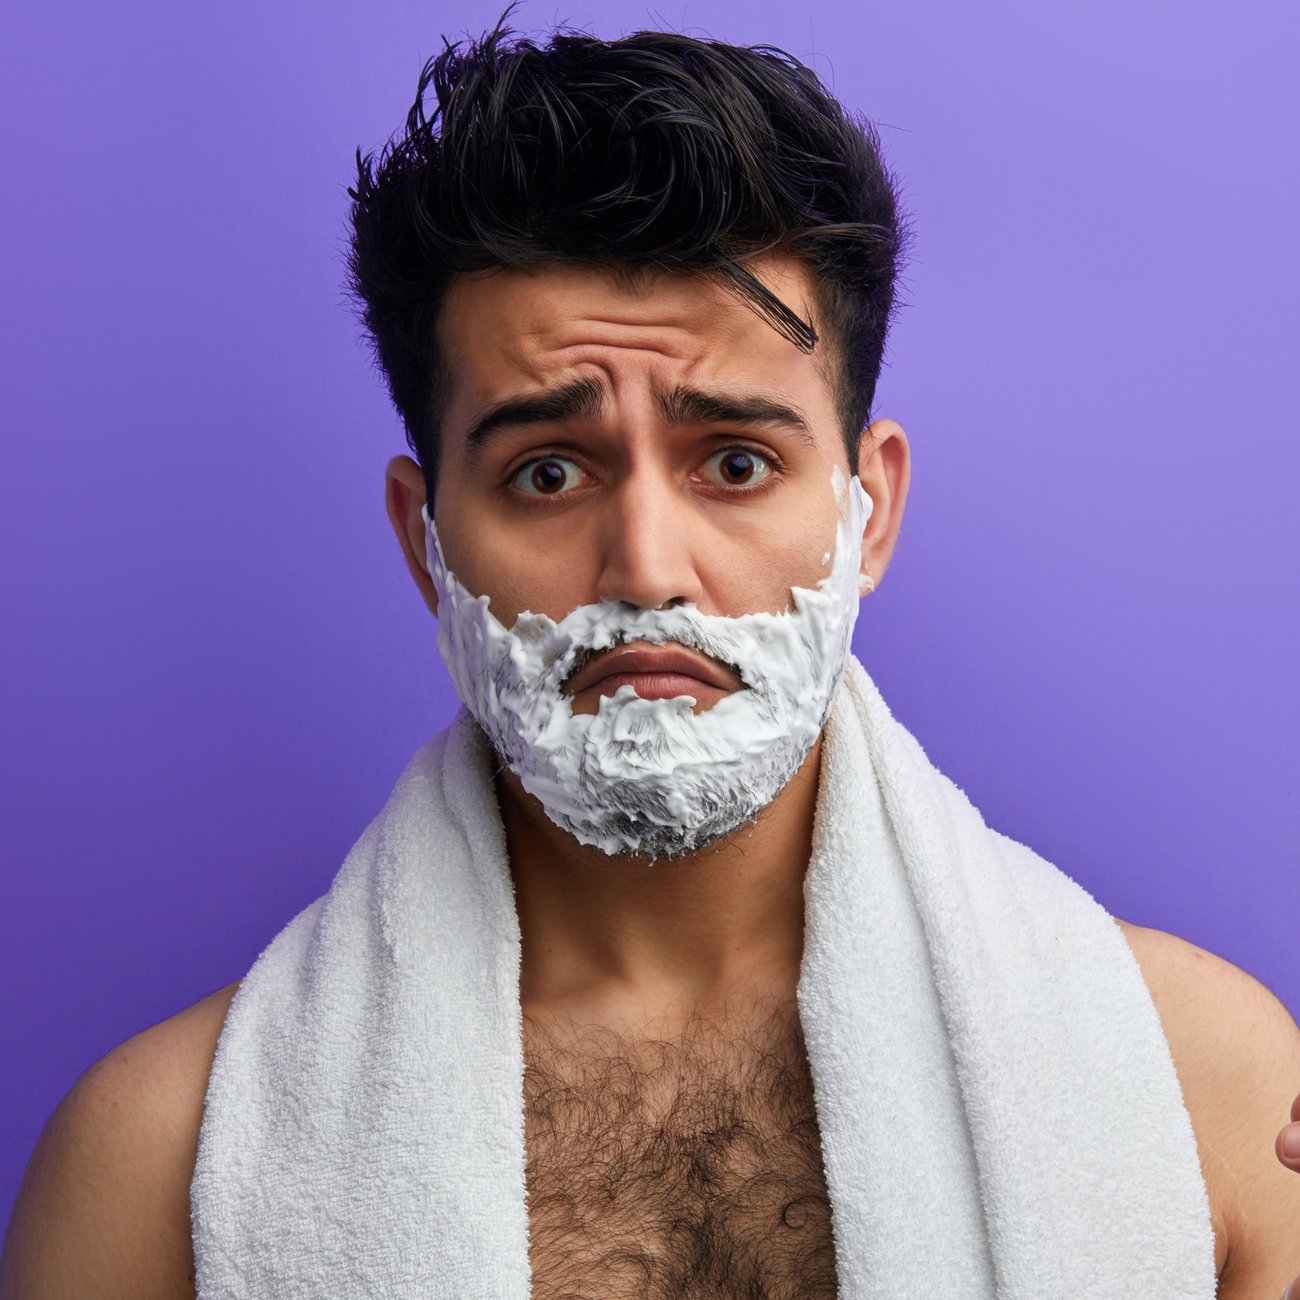 Shave the right way and avoid irritation and spots